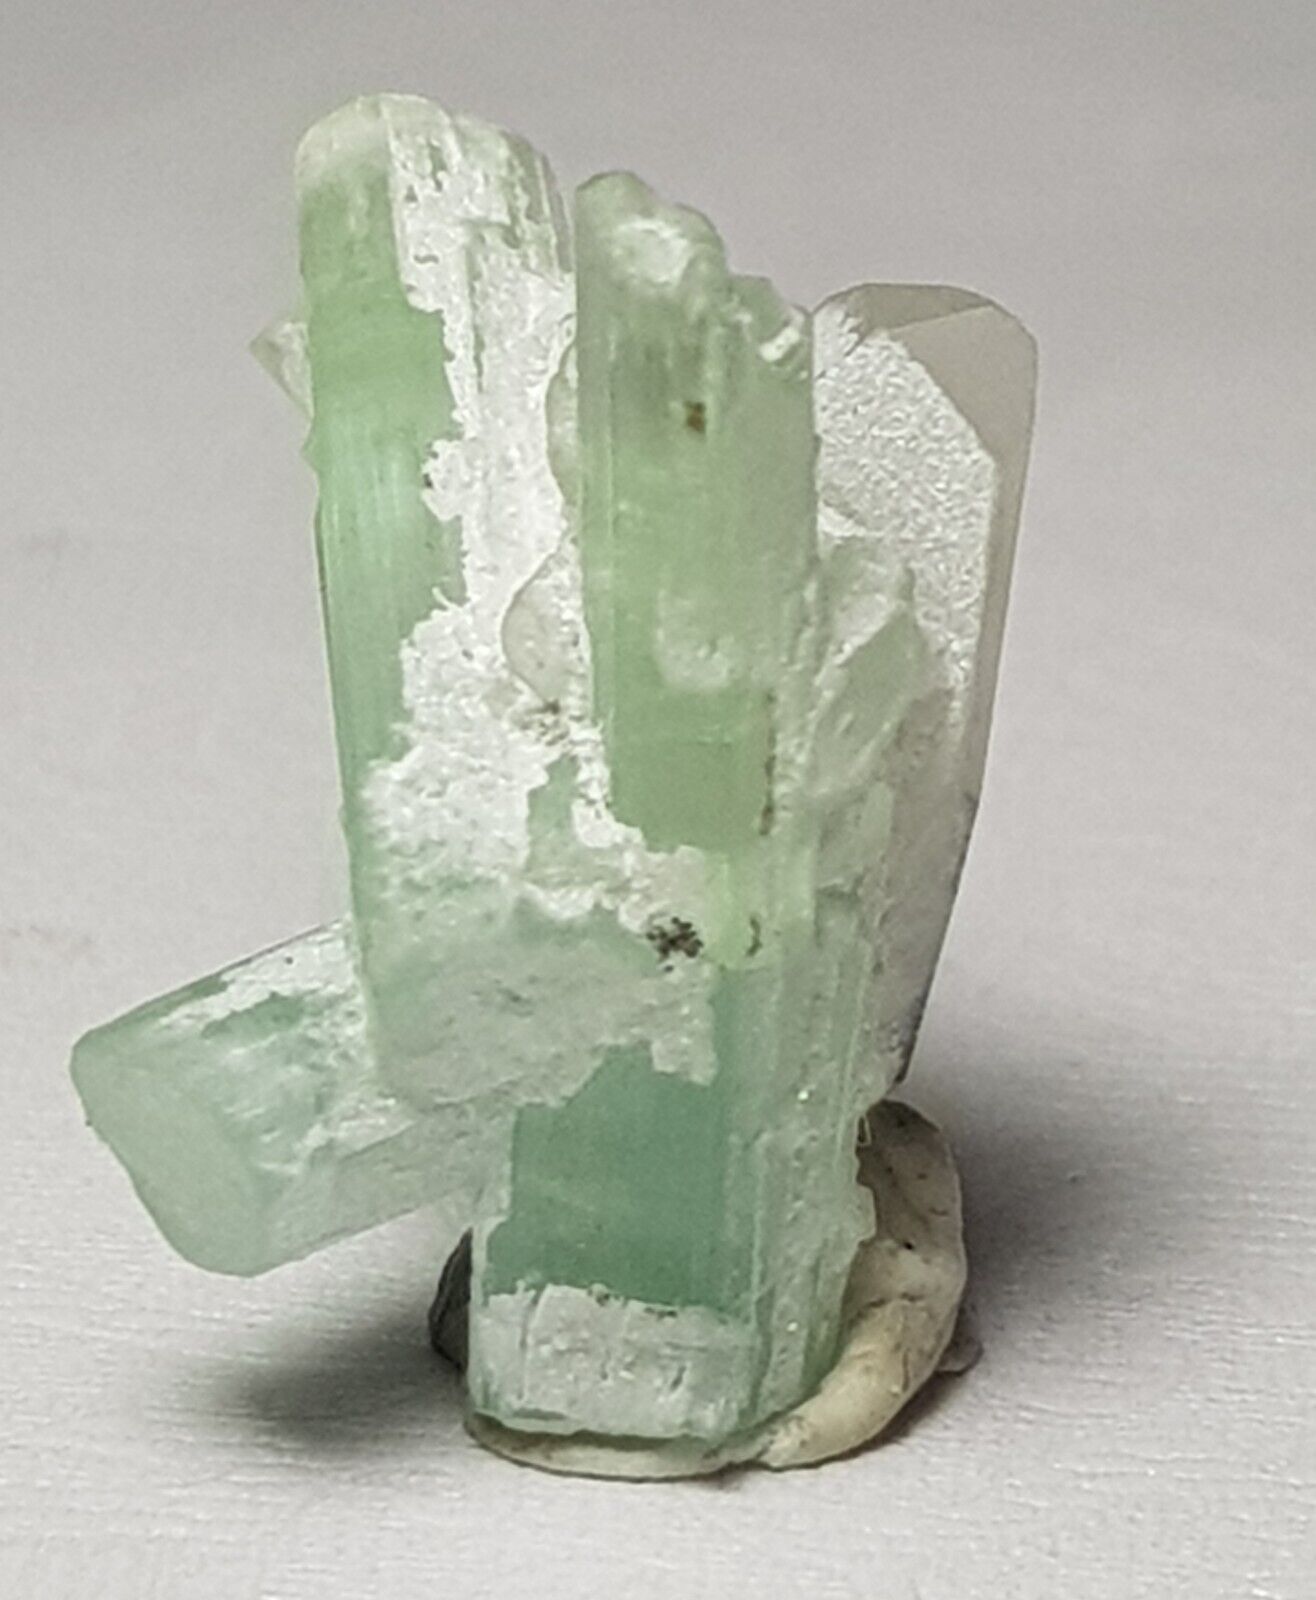 9.40Ct beautiful Natural bluish green color Tourmaline punch with quratz crystal